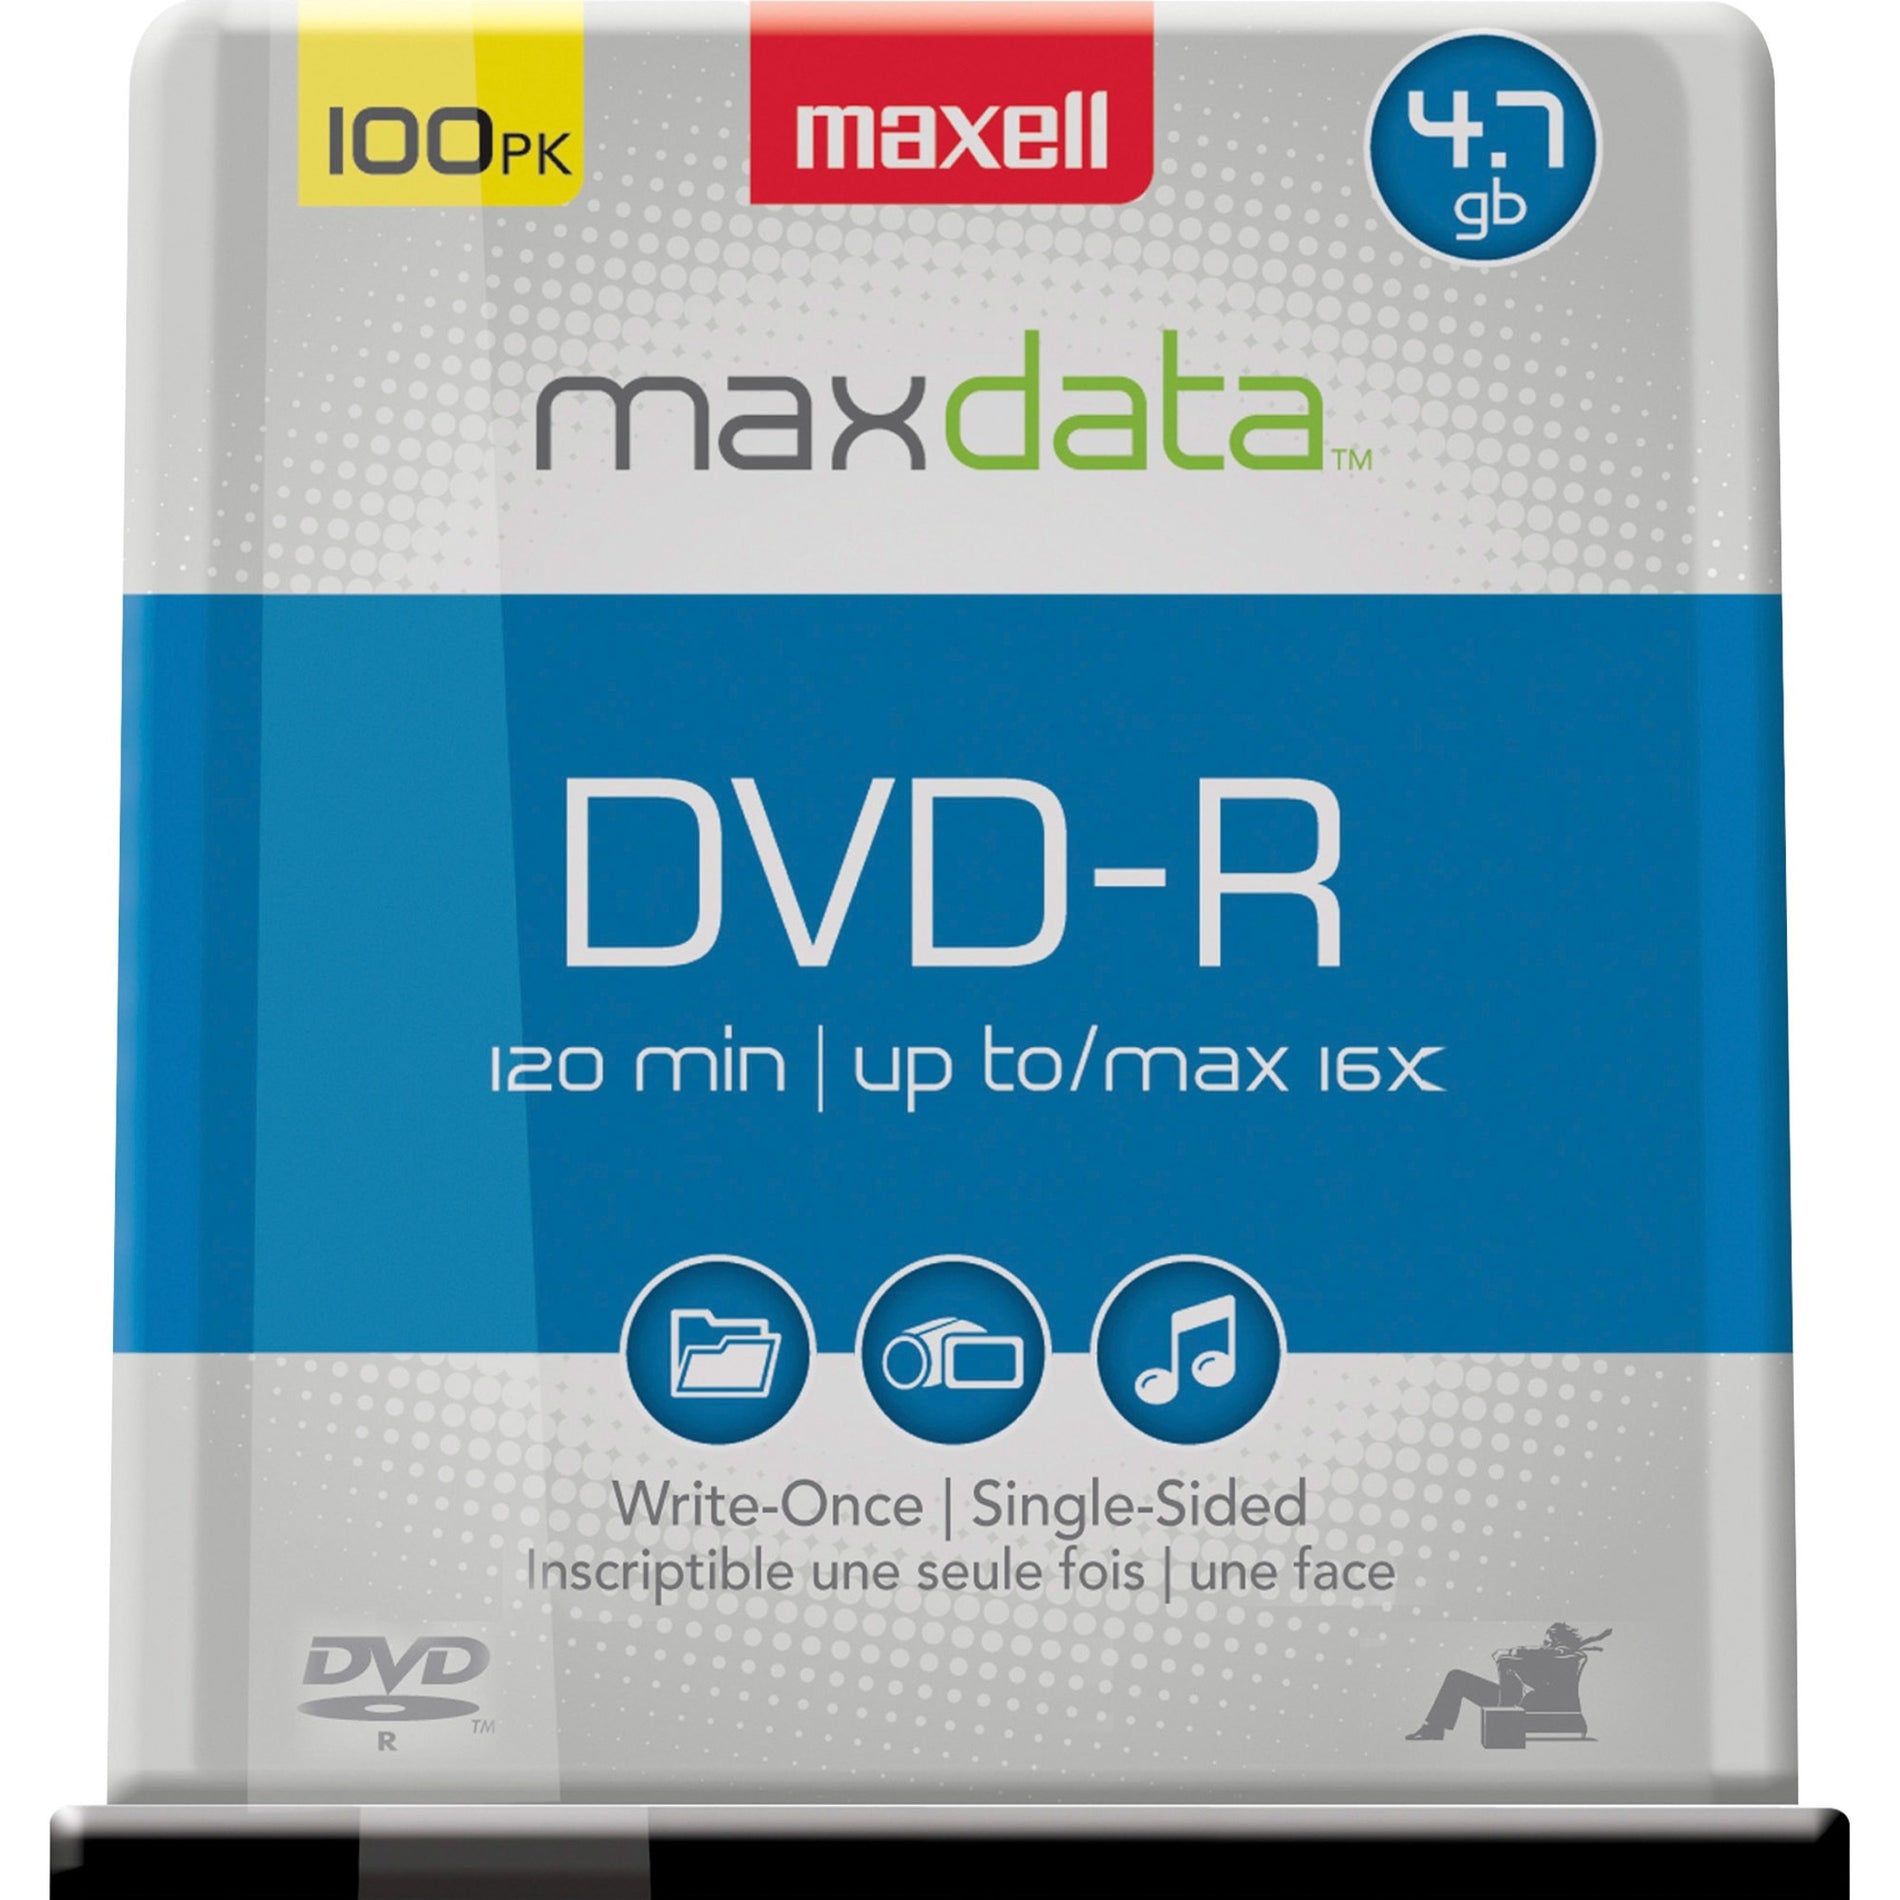 Maxell 16x DVD-R Media - 120mm [Discontinued]